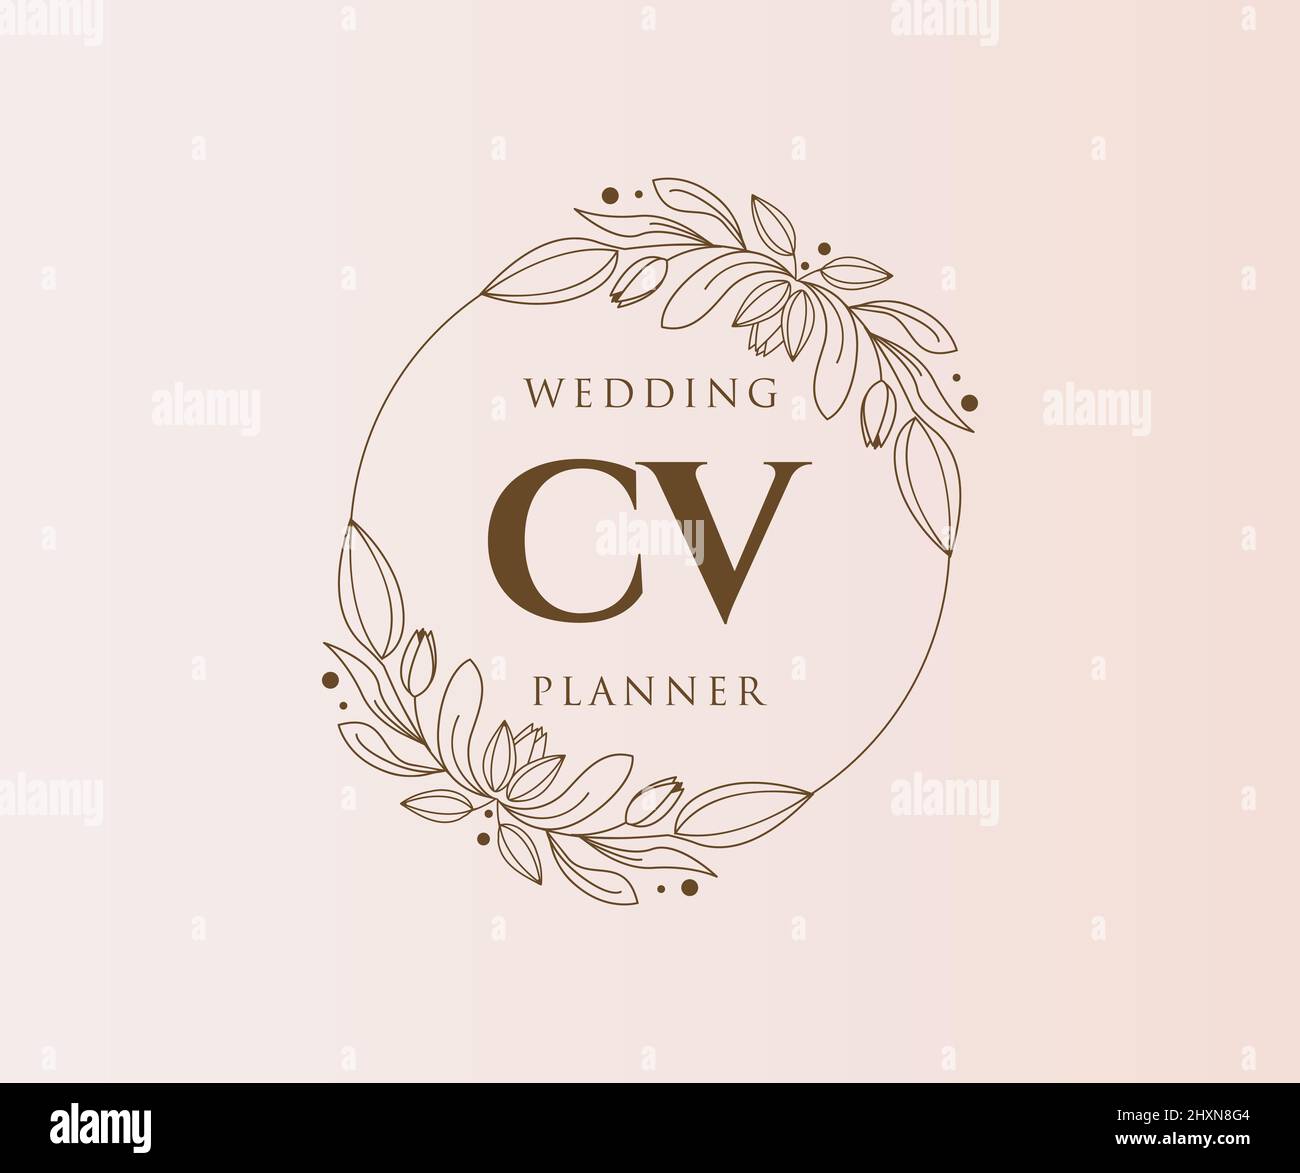 CV Initials letter Wedding monogram logos collection, hand drawn modern minimalistic and floral templates for Invitation cards, Save the Date, elegant Stock Vector